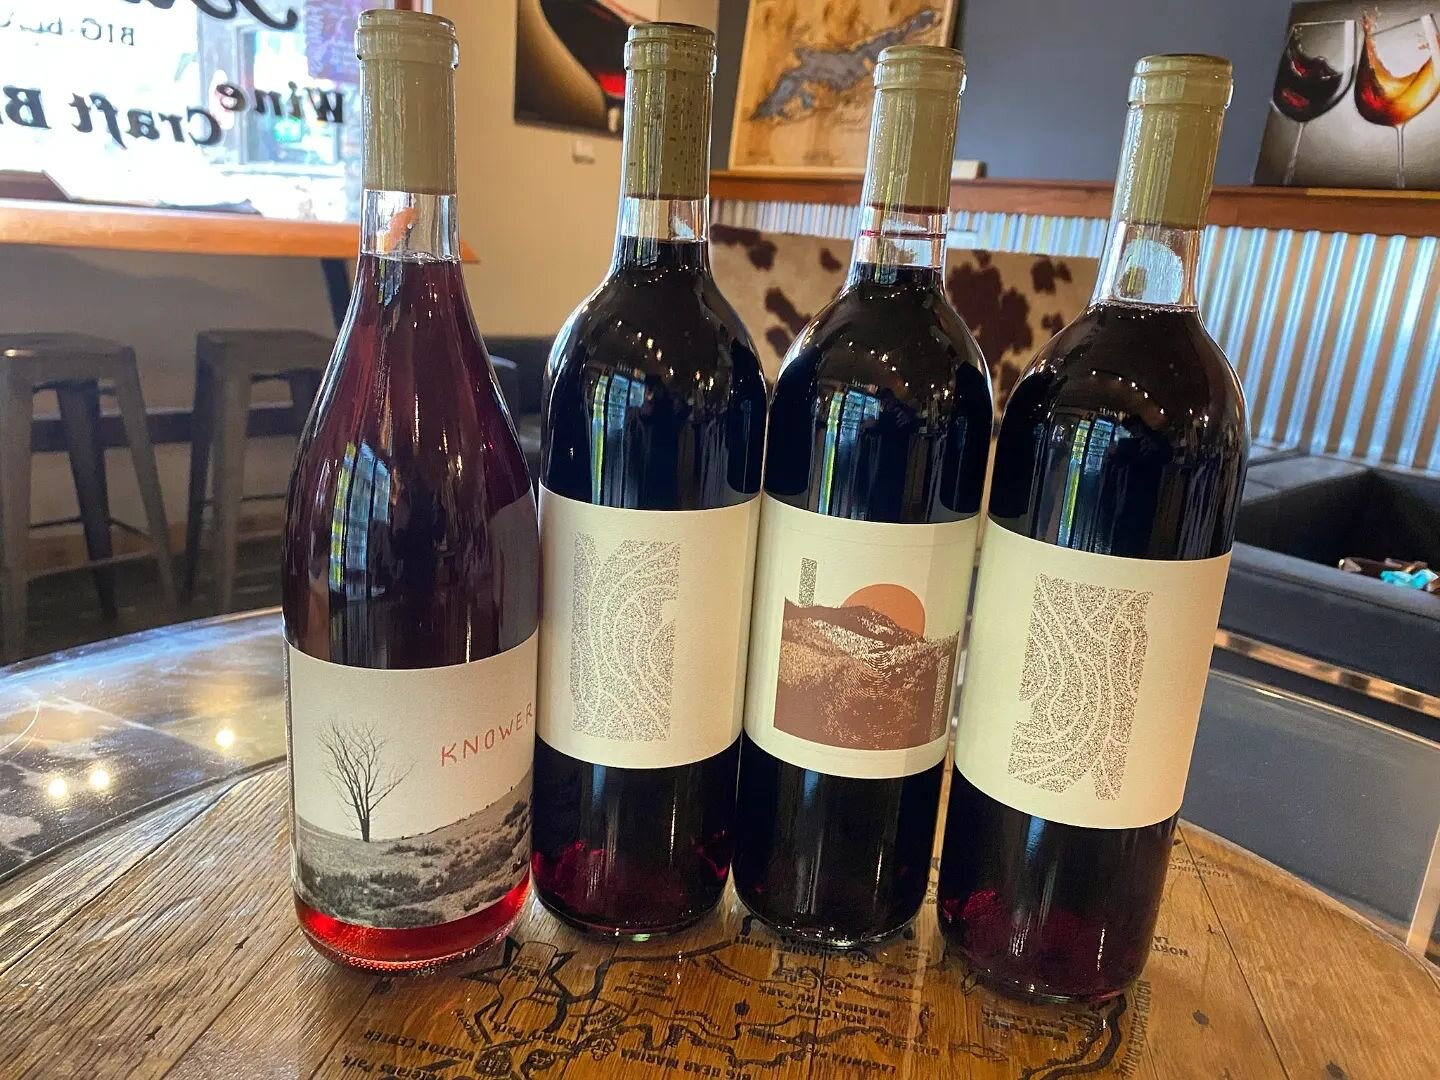 Spring snow storm case special! (We also need space for our new wines coming at the end of this month!)

Build a Case of these great Otra Cosa and Millesime Cellars wines for $180, including:

Pillar of Earth Red Blend
Knower Red Blend
Cabernet Sauvi